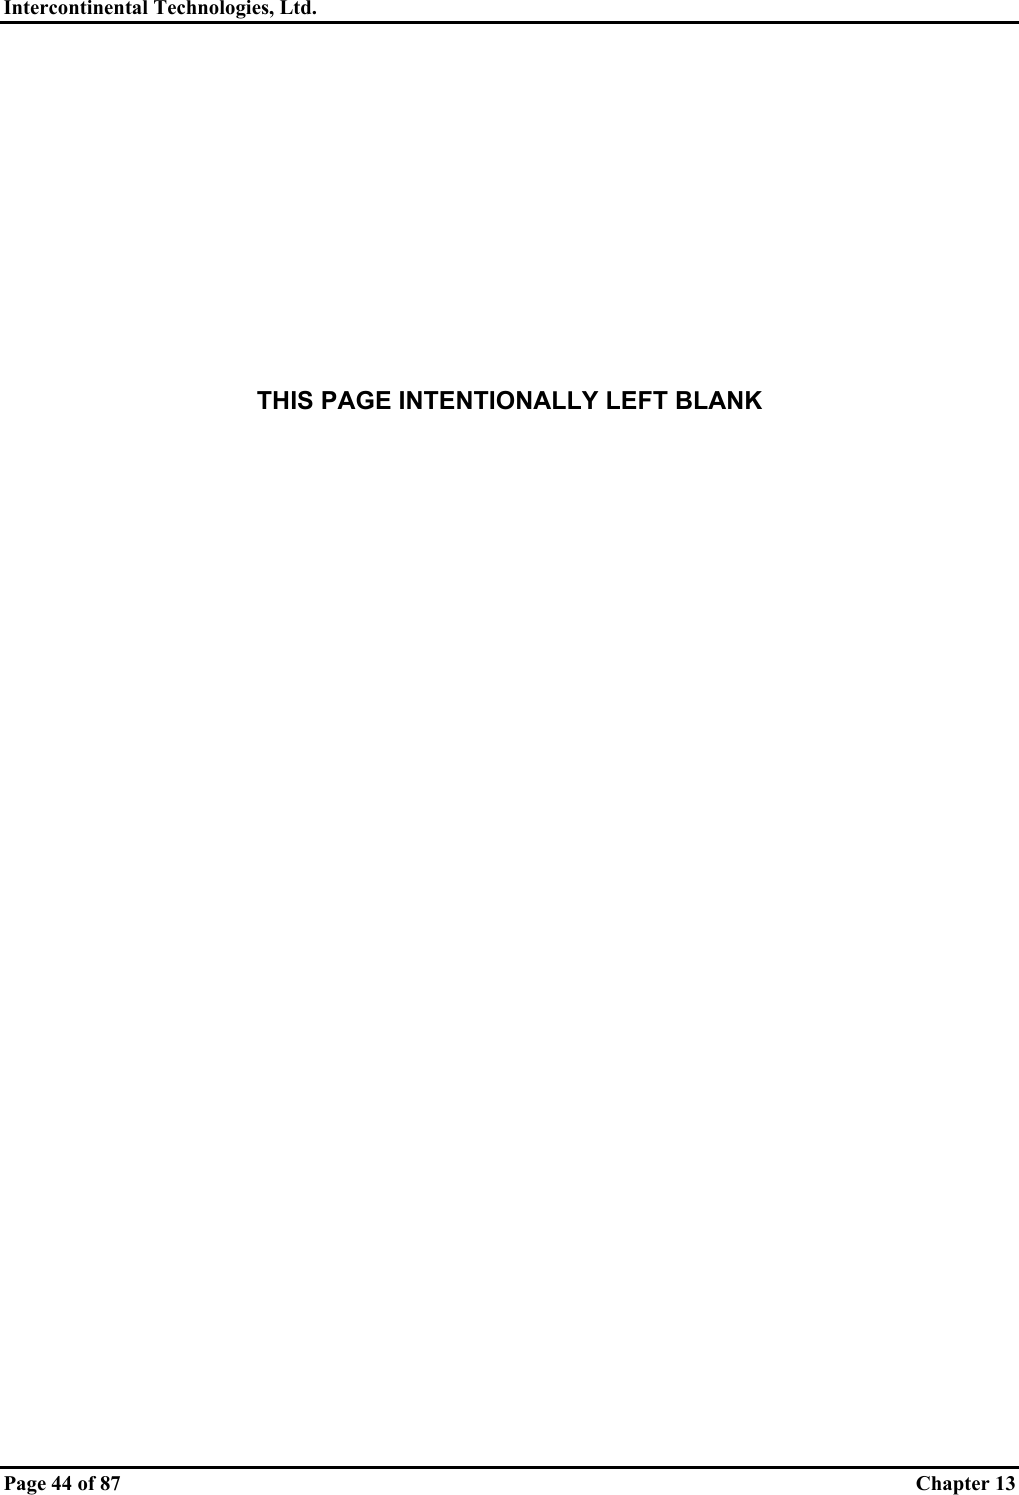 Intercontinental Technologies, Ltd.   Page 44 of 87  Chapter 13            THIS PAGE INTENTIONALLY LEFT BLANK   